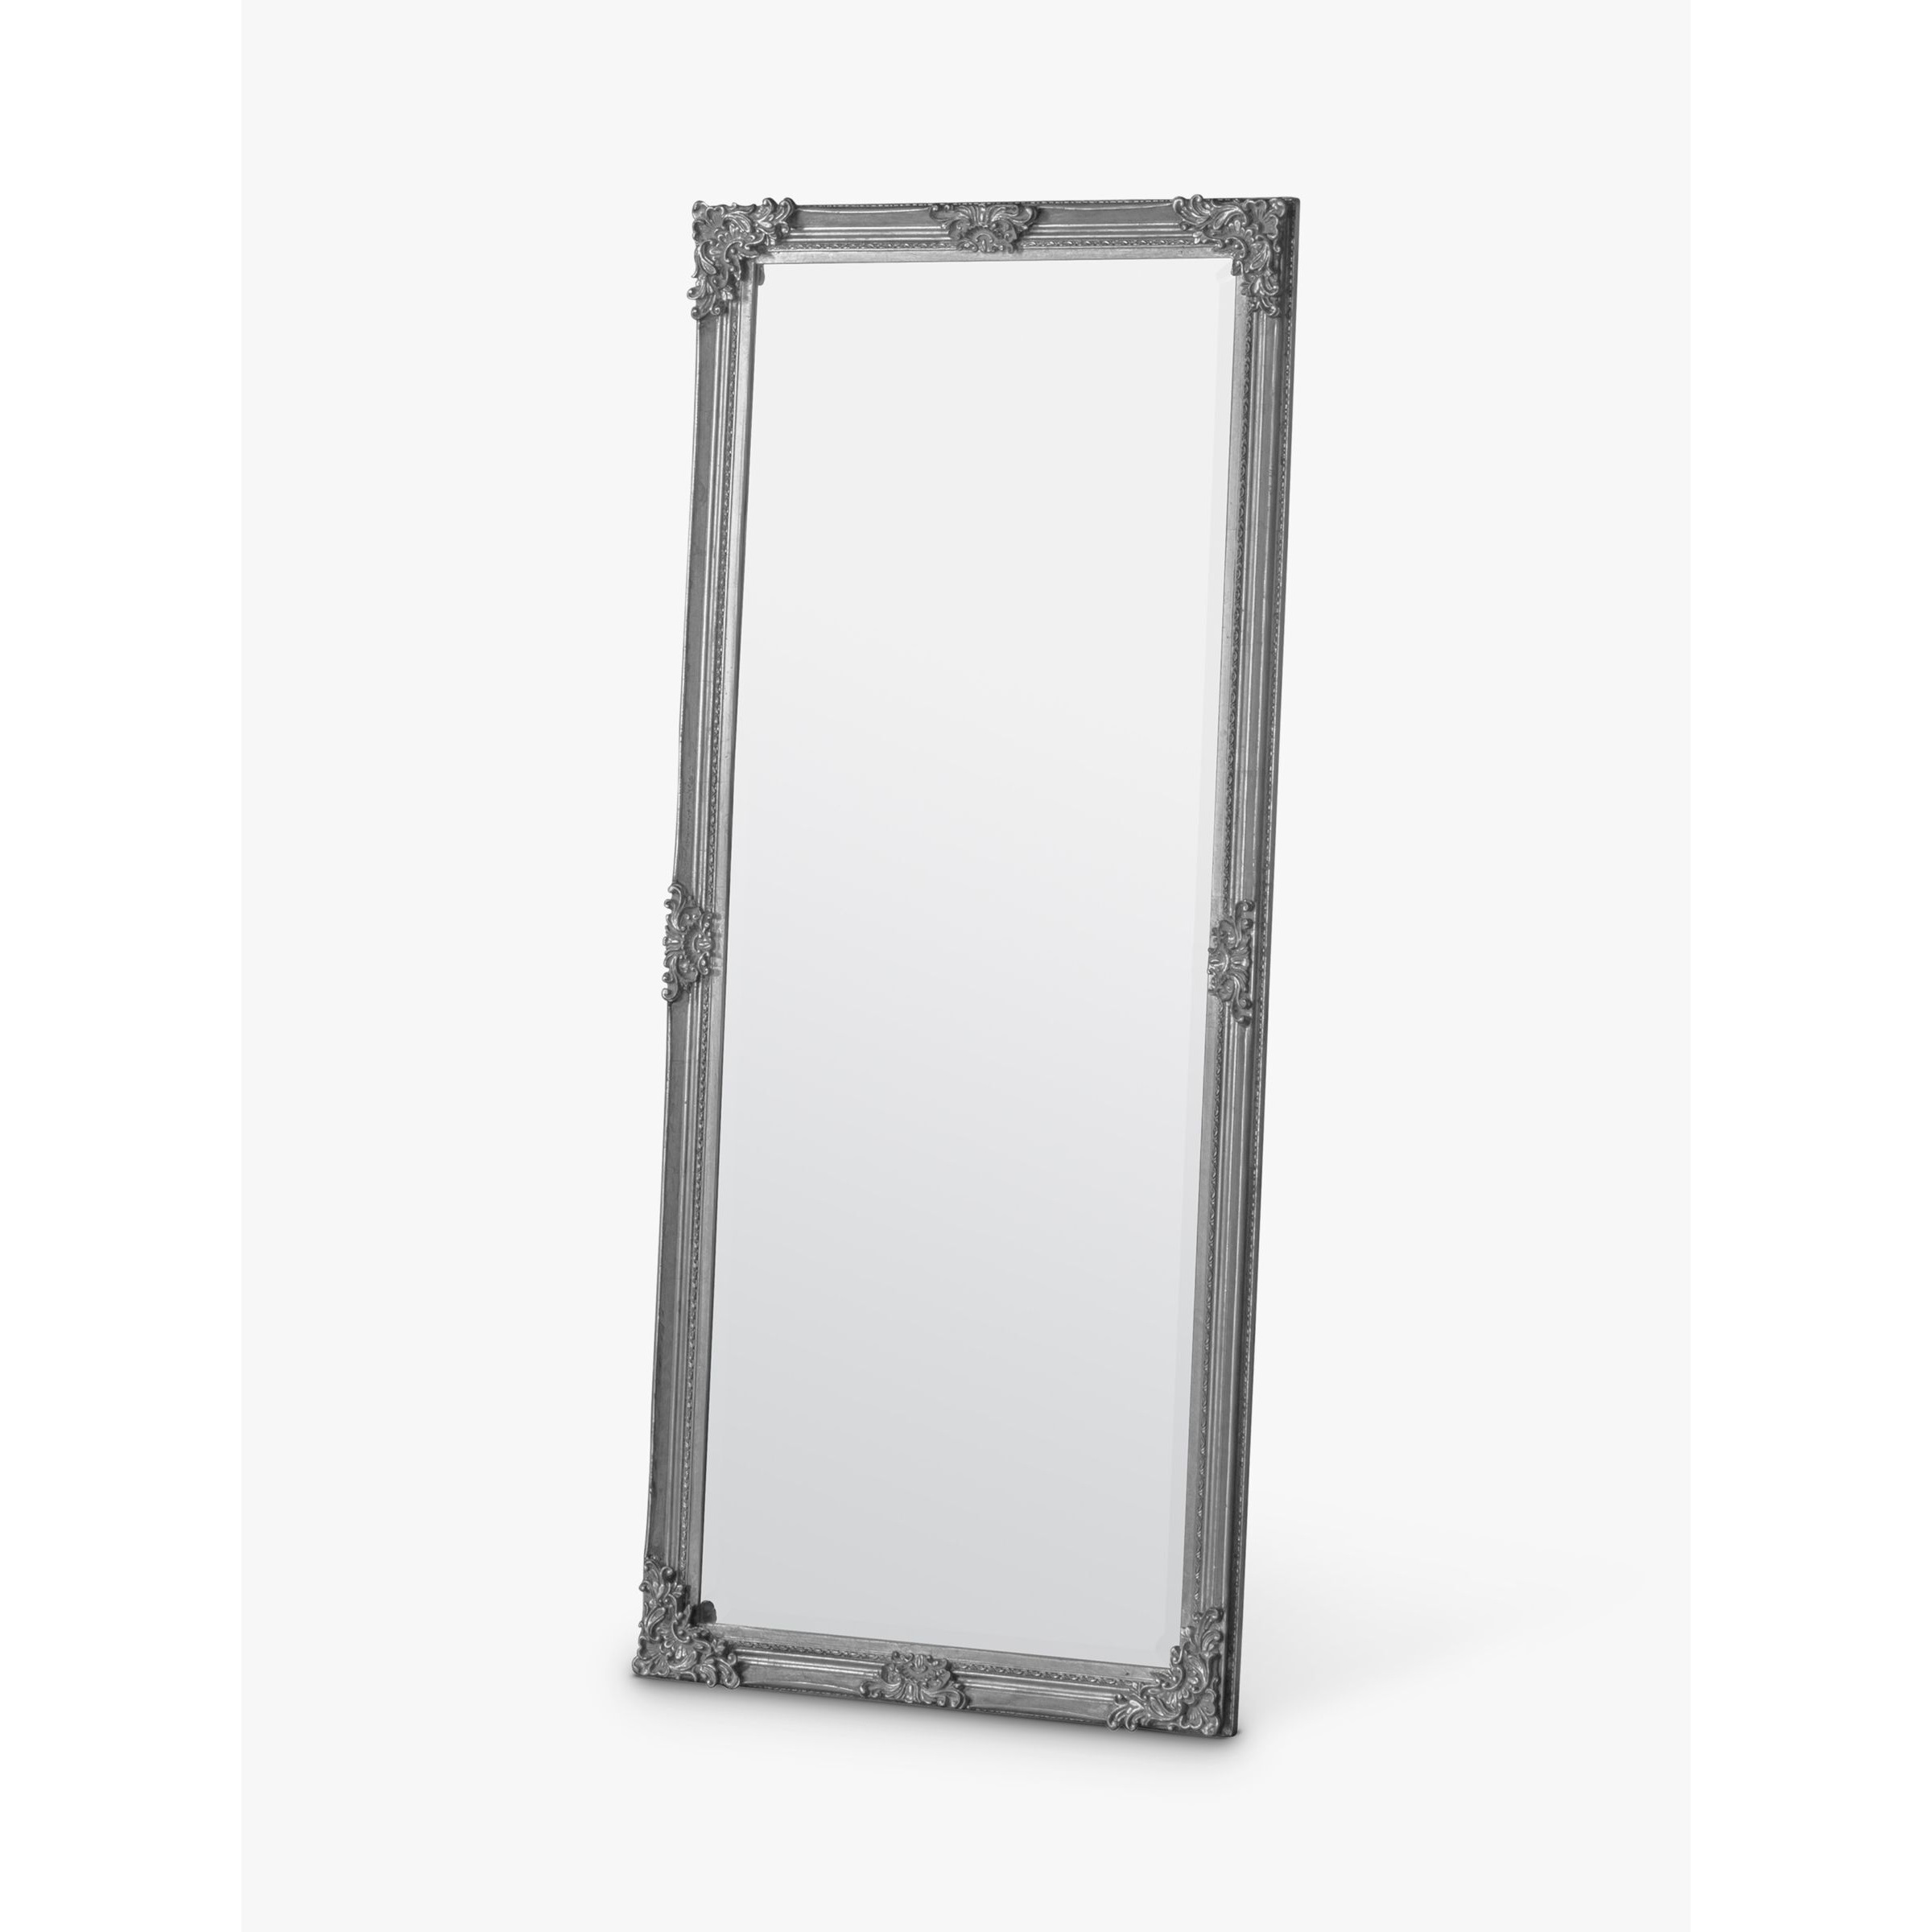 Gallery Direct Fiennes Rectangular Decorative Frame Leaner / Wall Mirror, 160 x 70cm - image 1